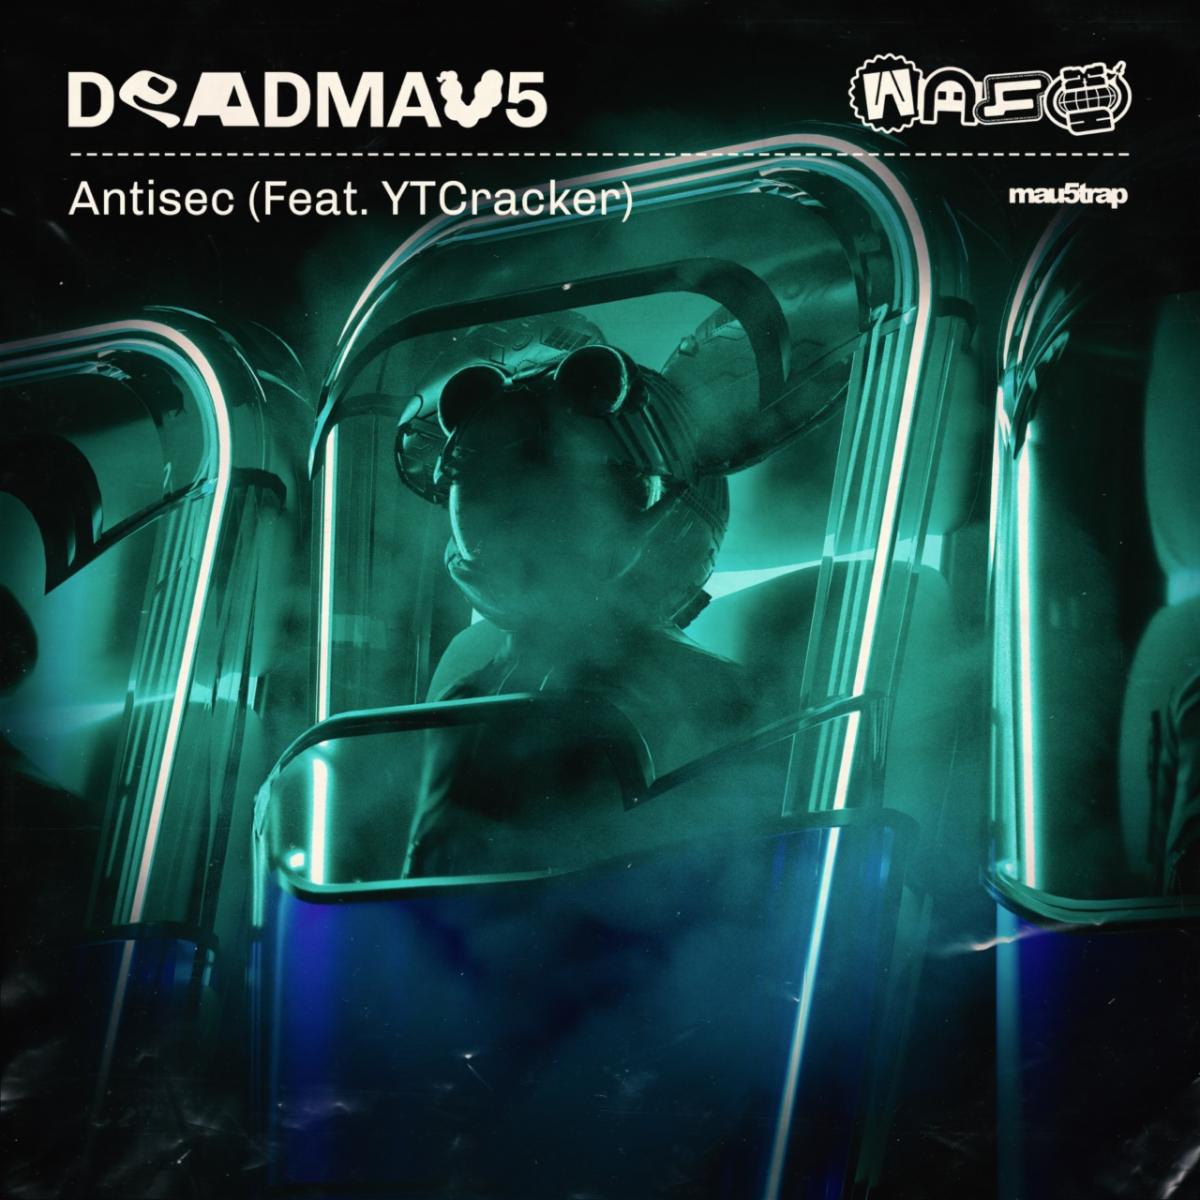 deadmau5 New Single "Antisec (feat. YTCracker)" Out Today, Jan 3; mau5trap Label Compilation 'We Are Friends Vol. 11' Out This Friday